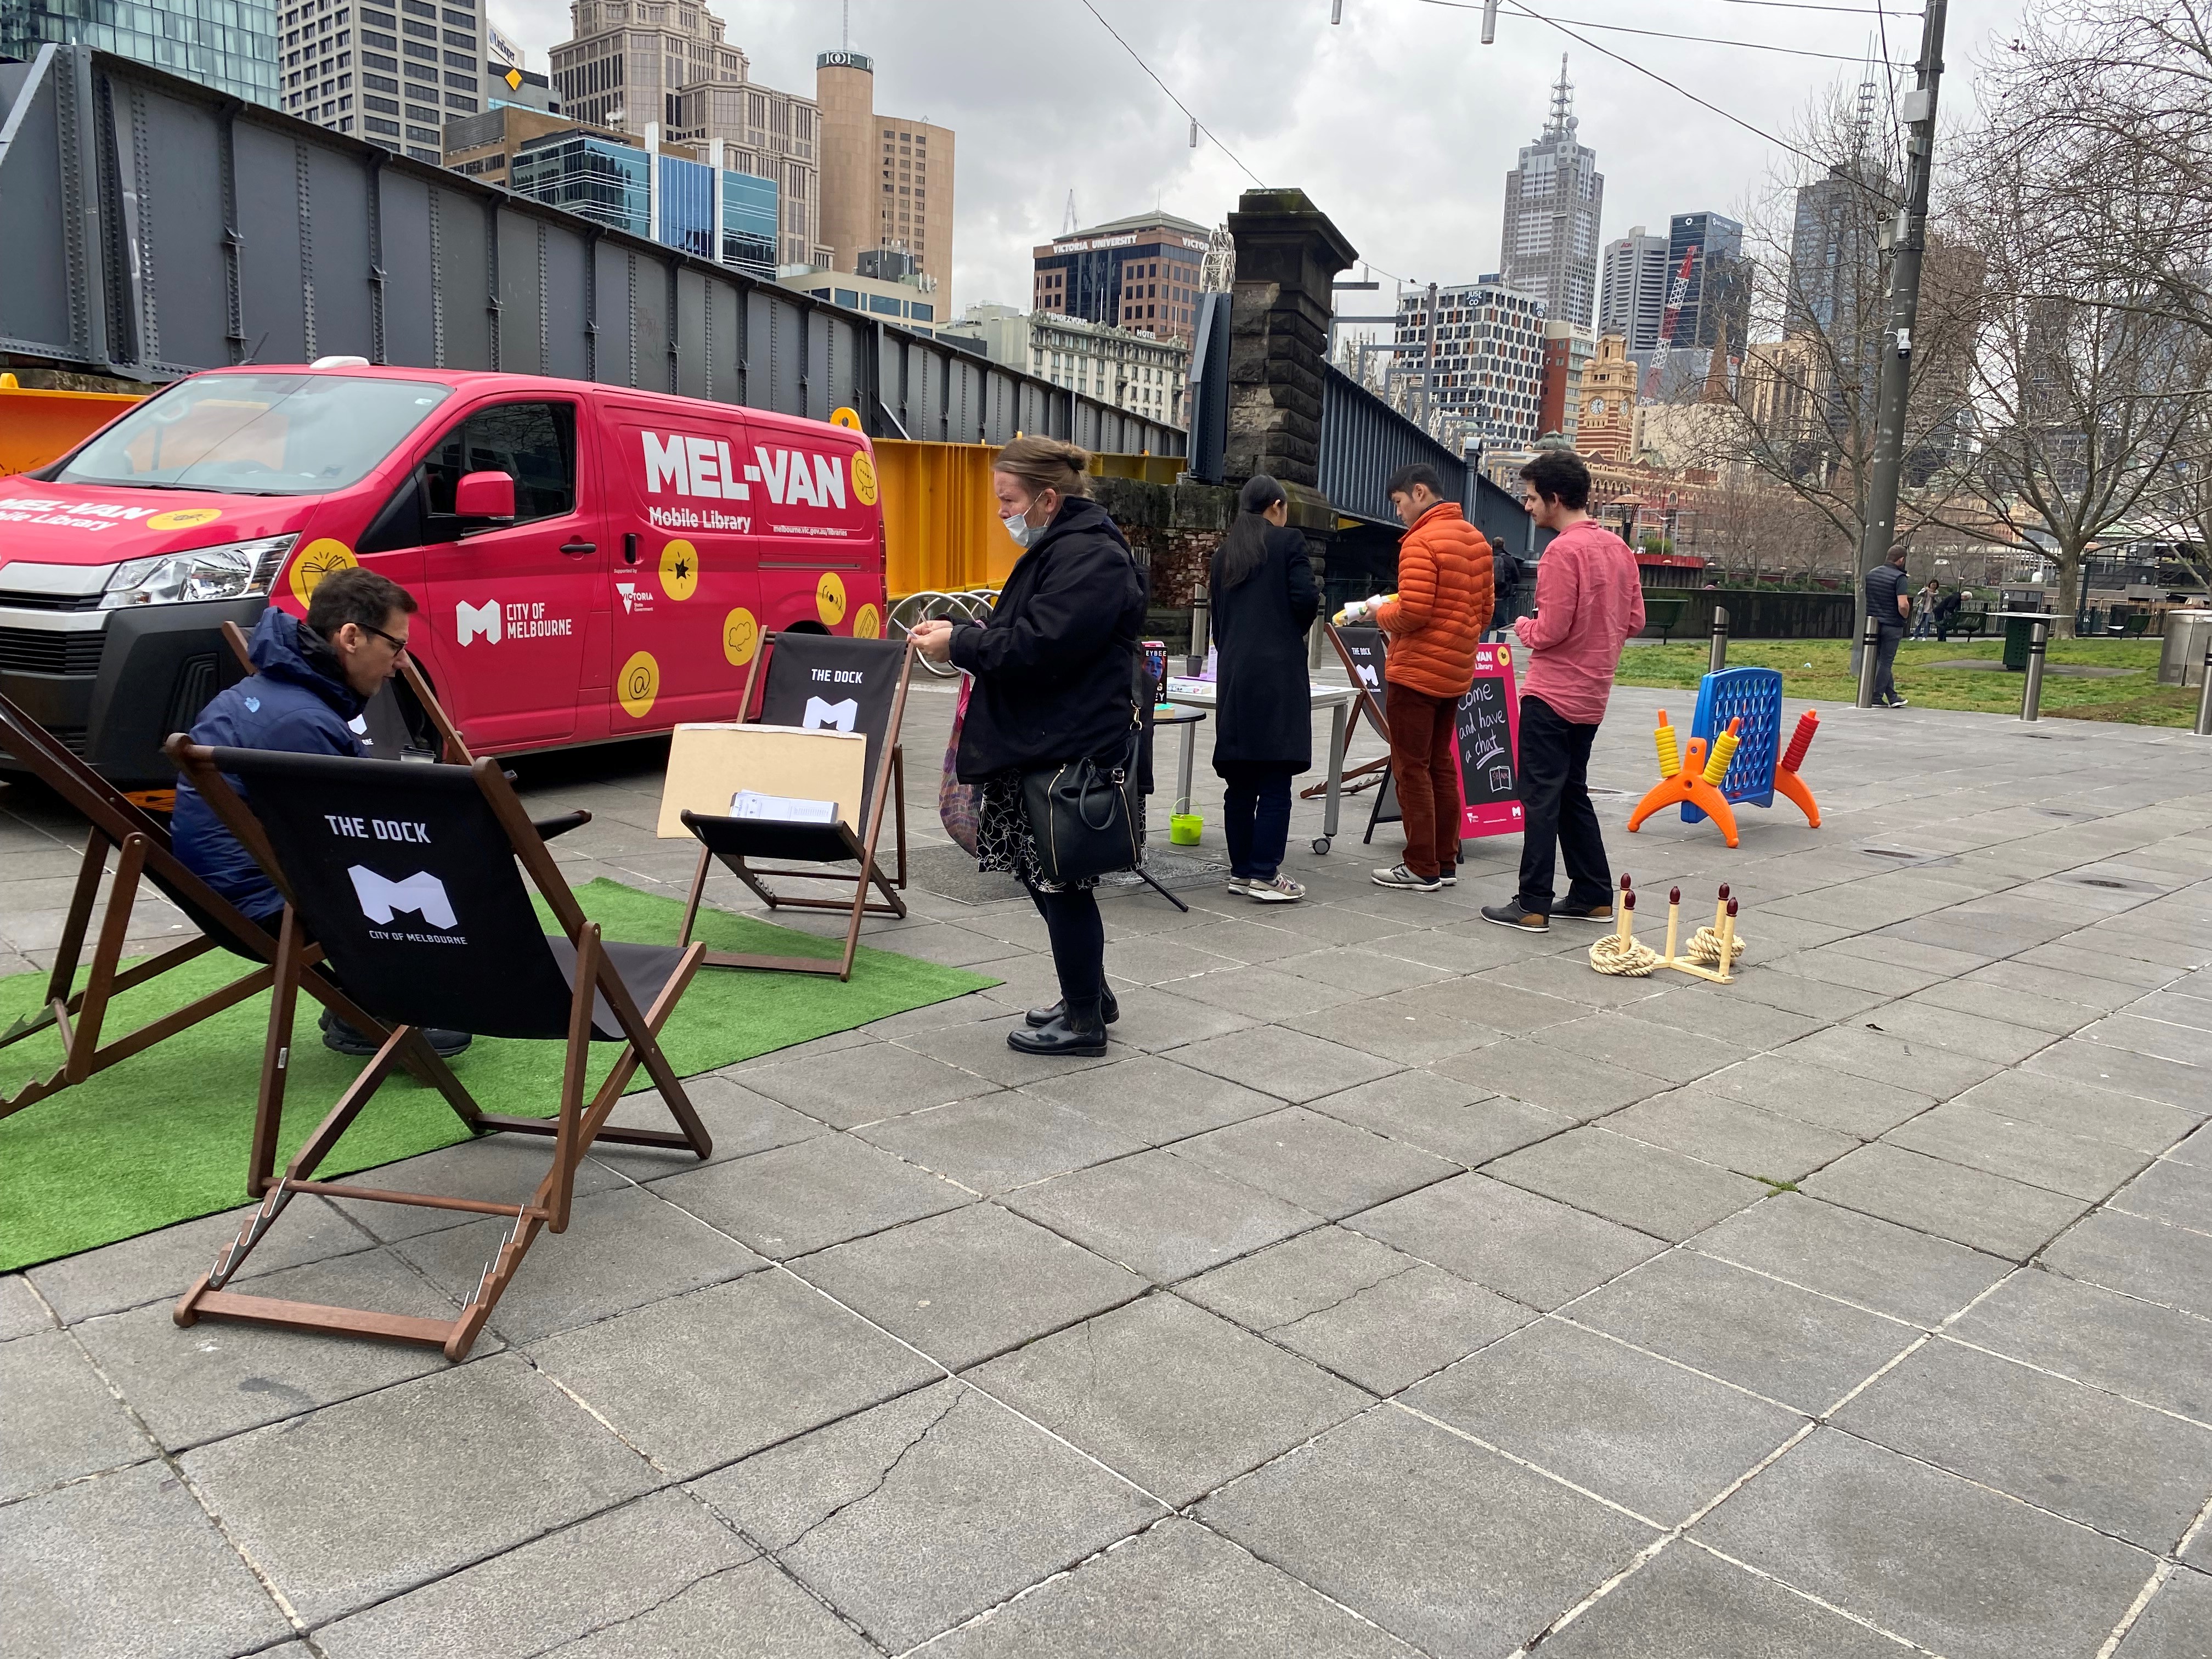 Some members of the public having a look at the city of melbourne libraries mel-van and some of the activities that it contains